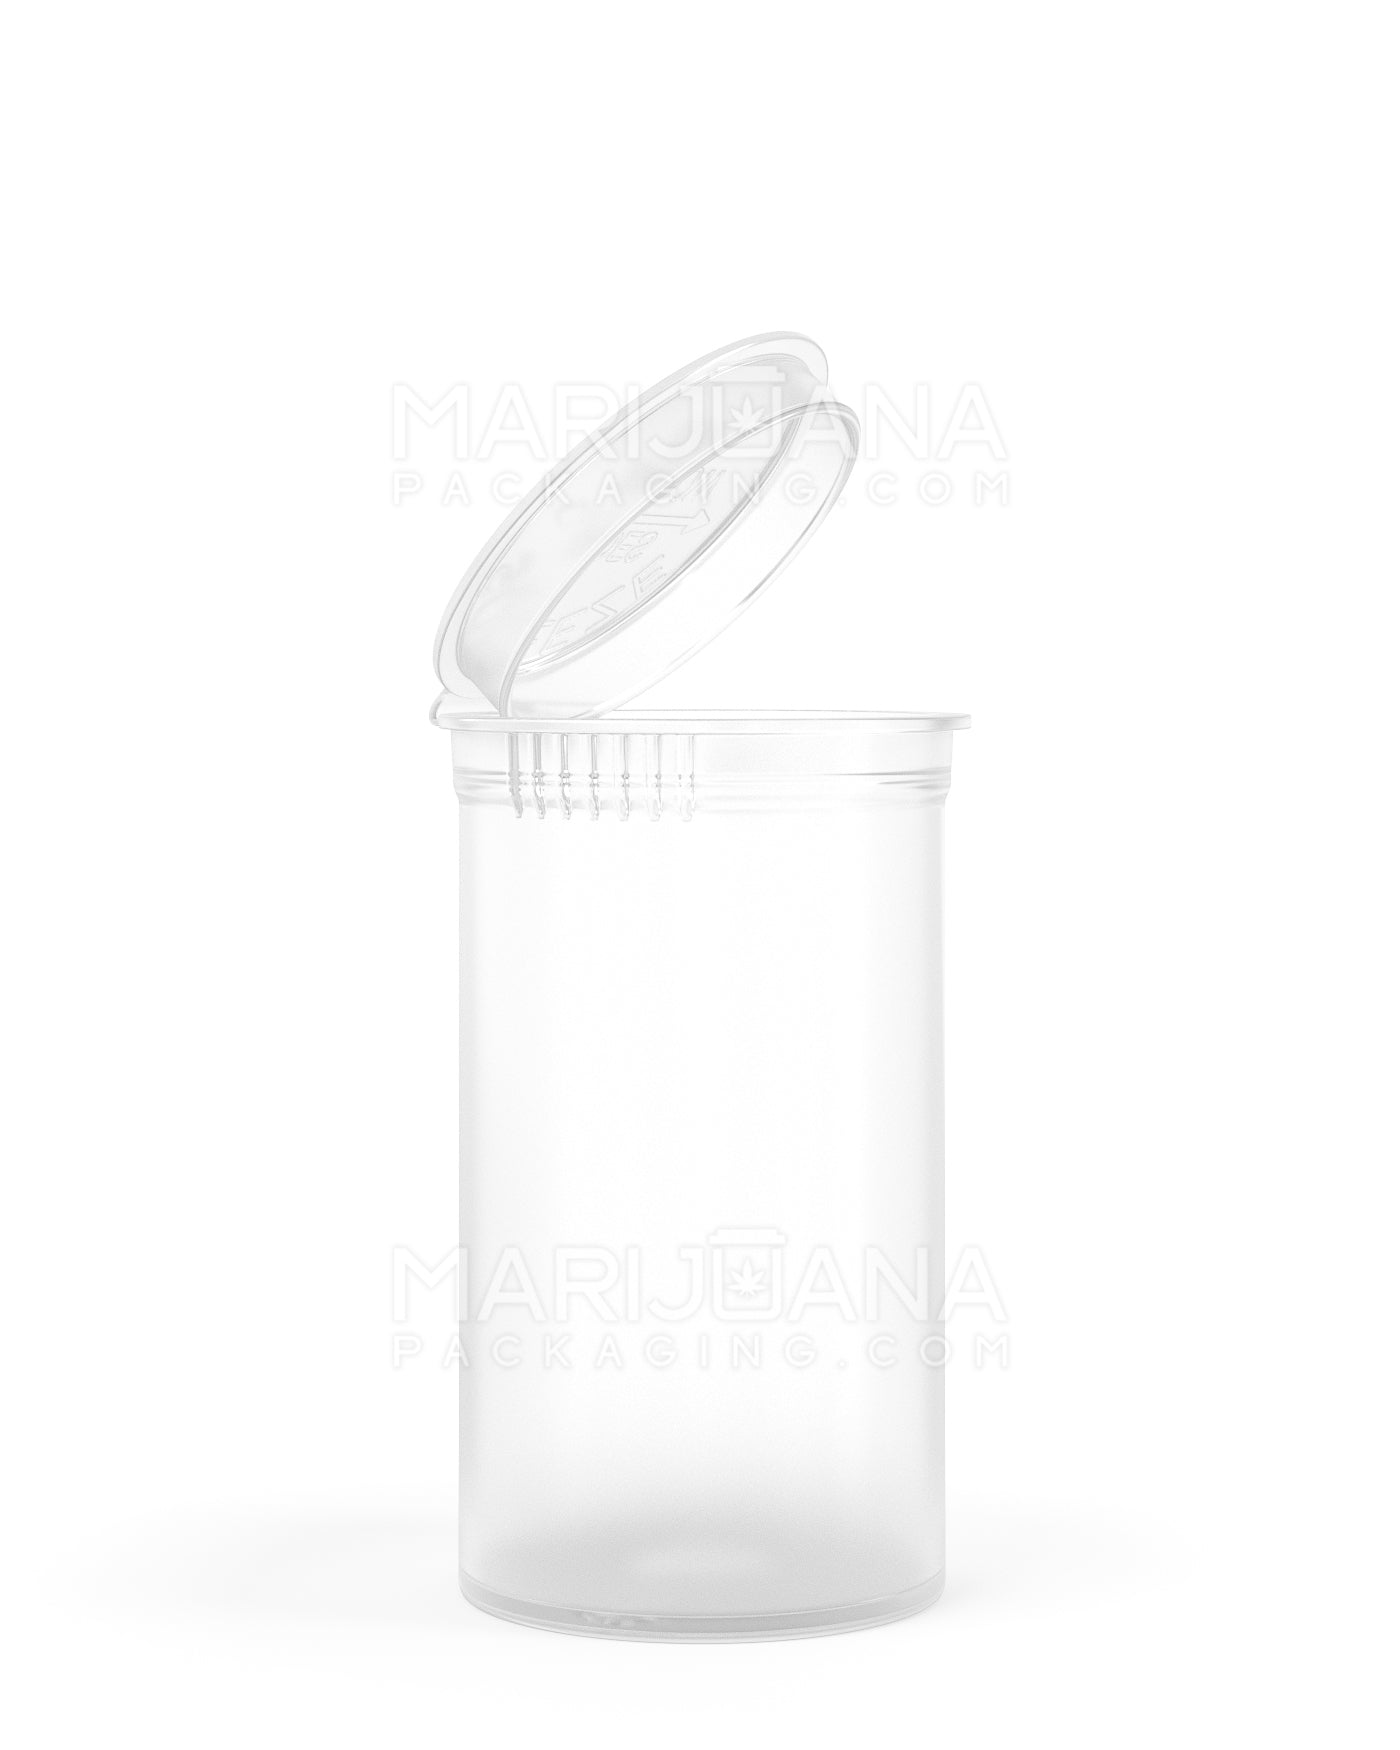 Child Resistant & Sustainable | 100% Biodegradable Clear Pop Top Bottles | 19dr - 3.5g - 225 Count - 1